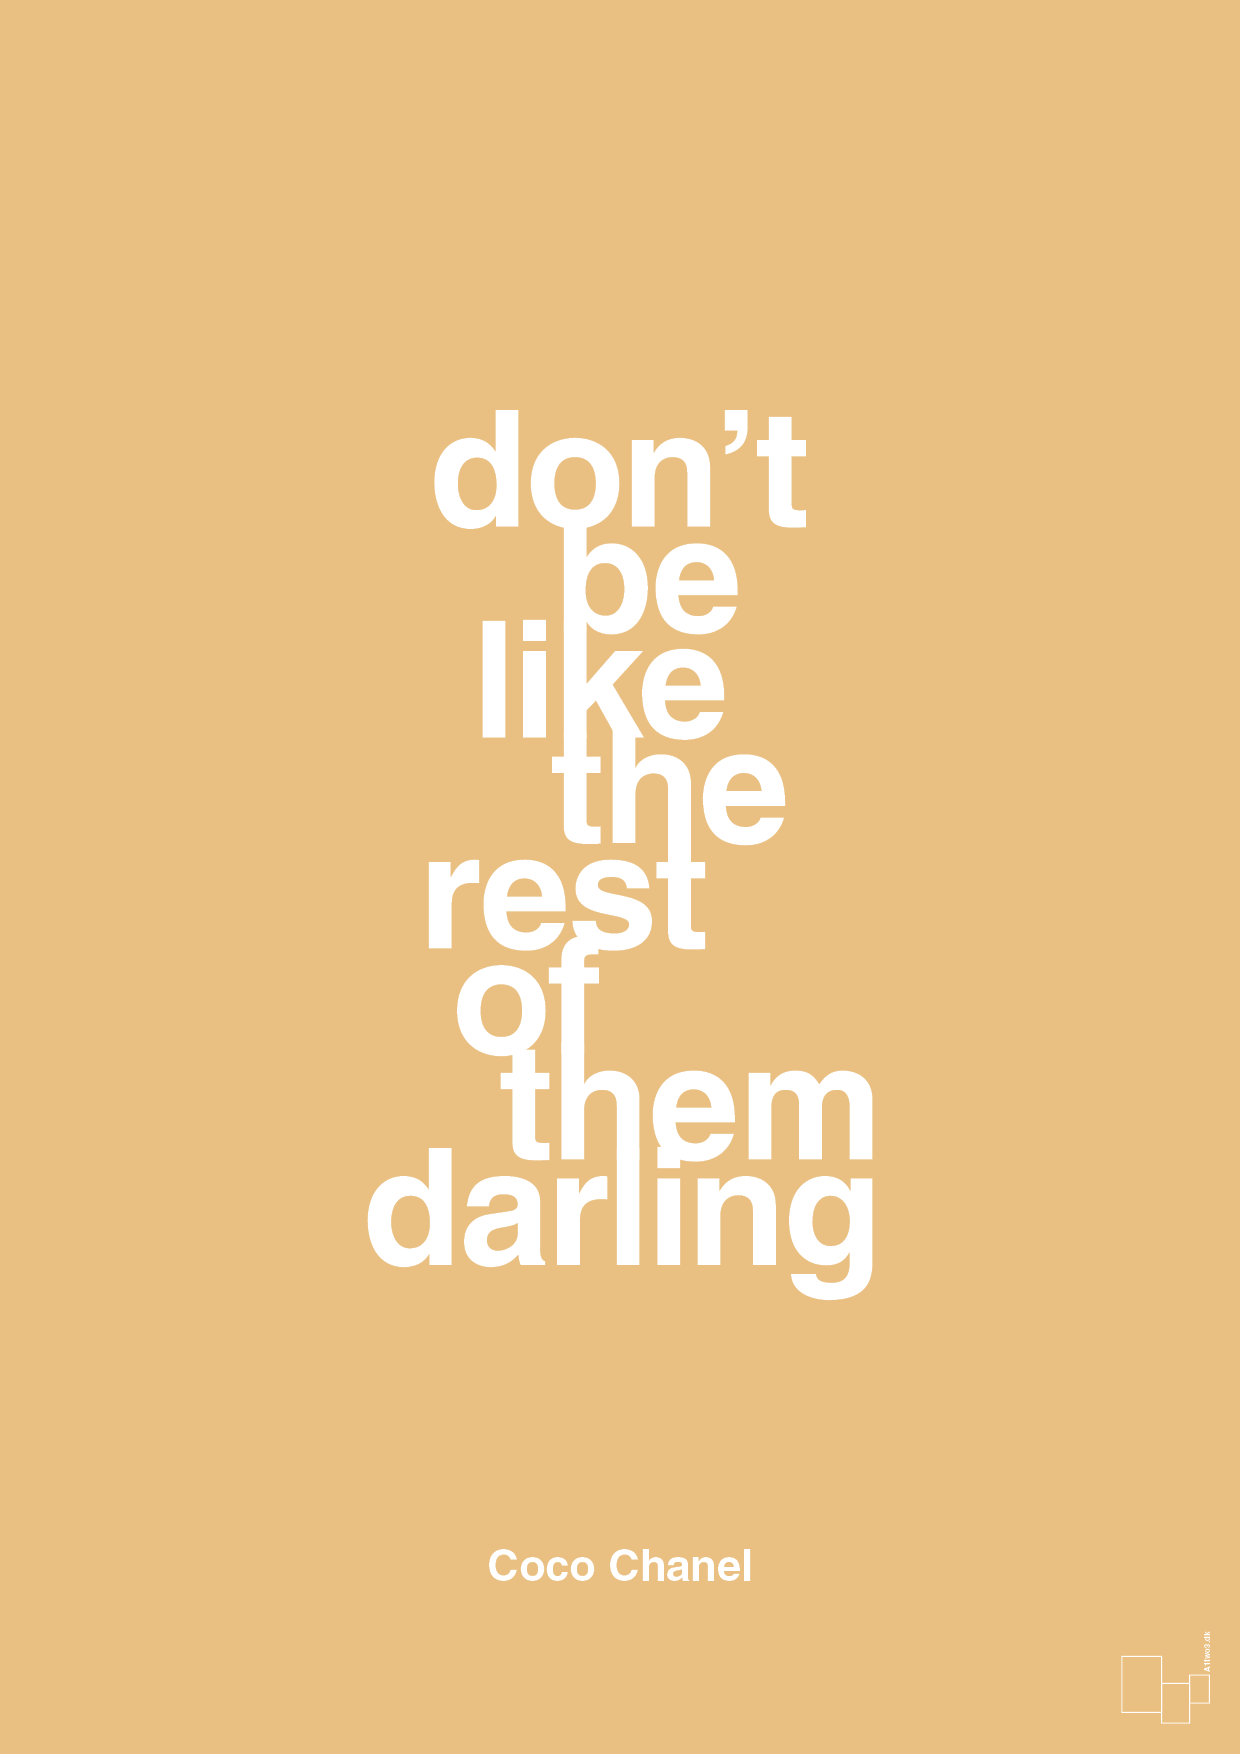 don’t be like the rest of them darling - Plakat med Citater i Charismatic